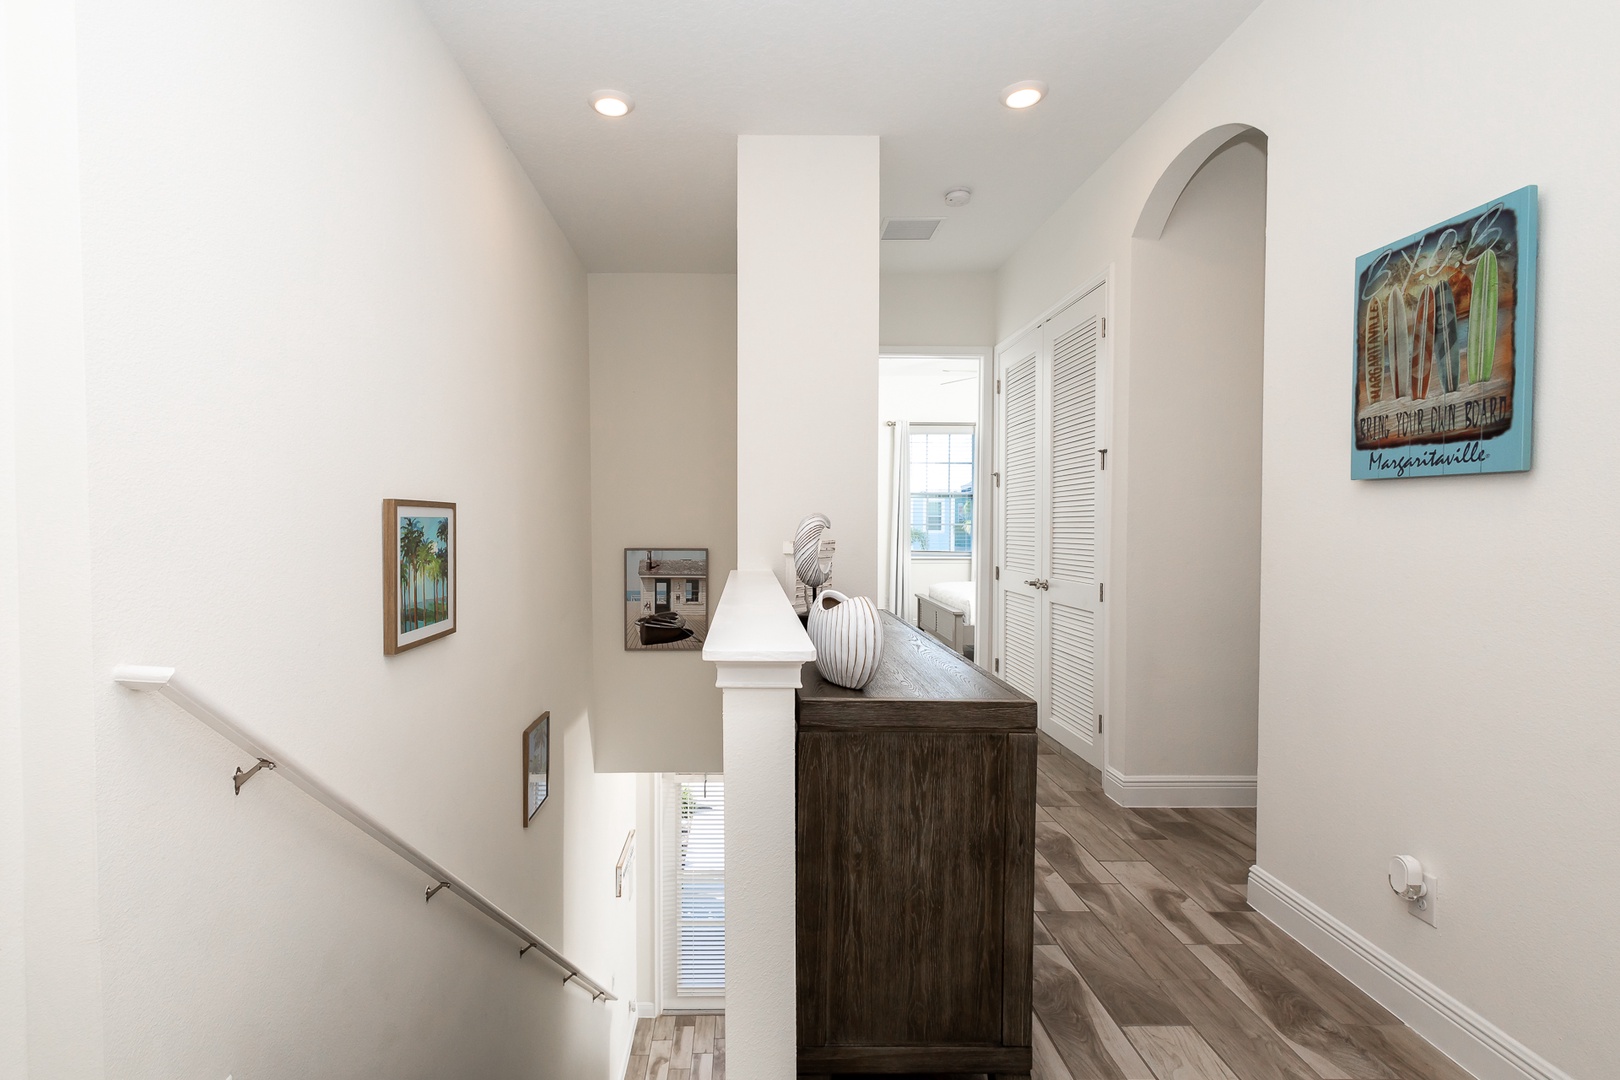 The airy 2nd floor hallway offers plenty of space & light